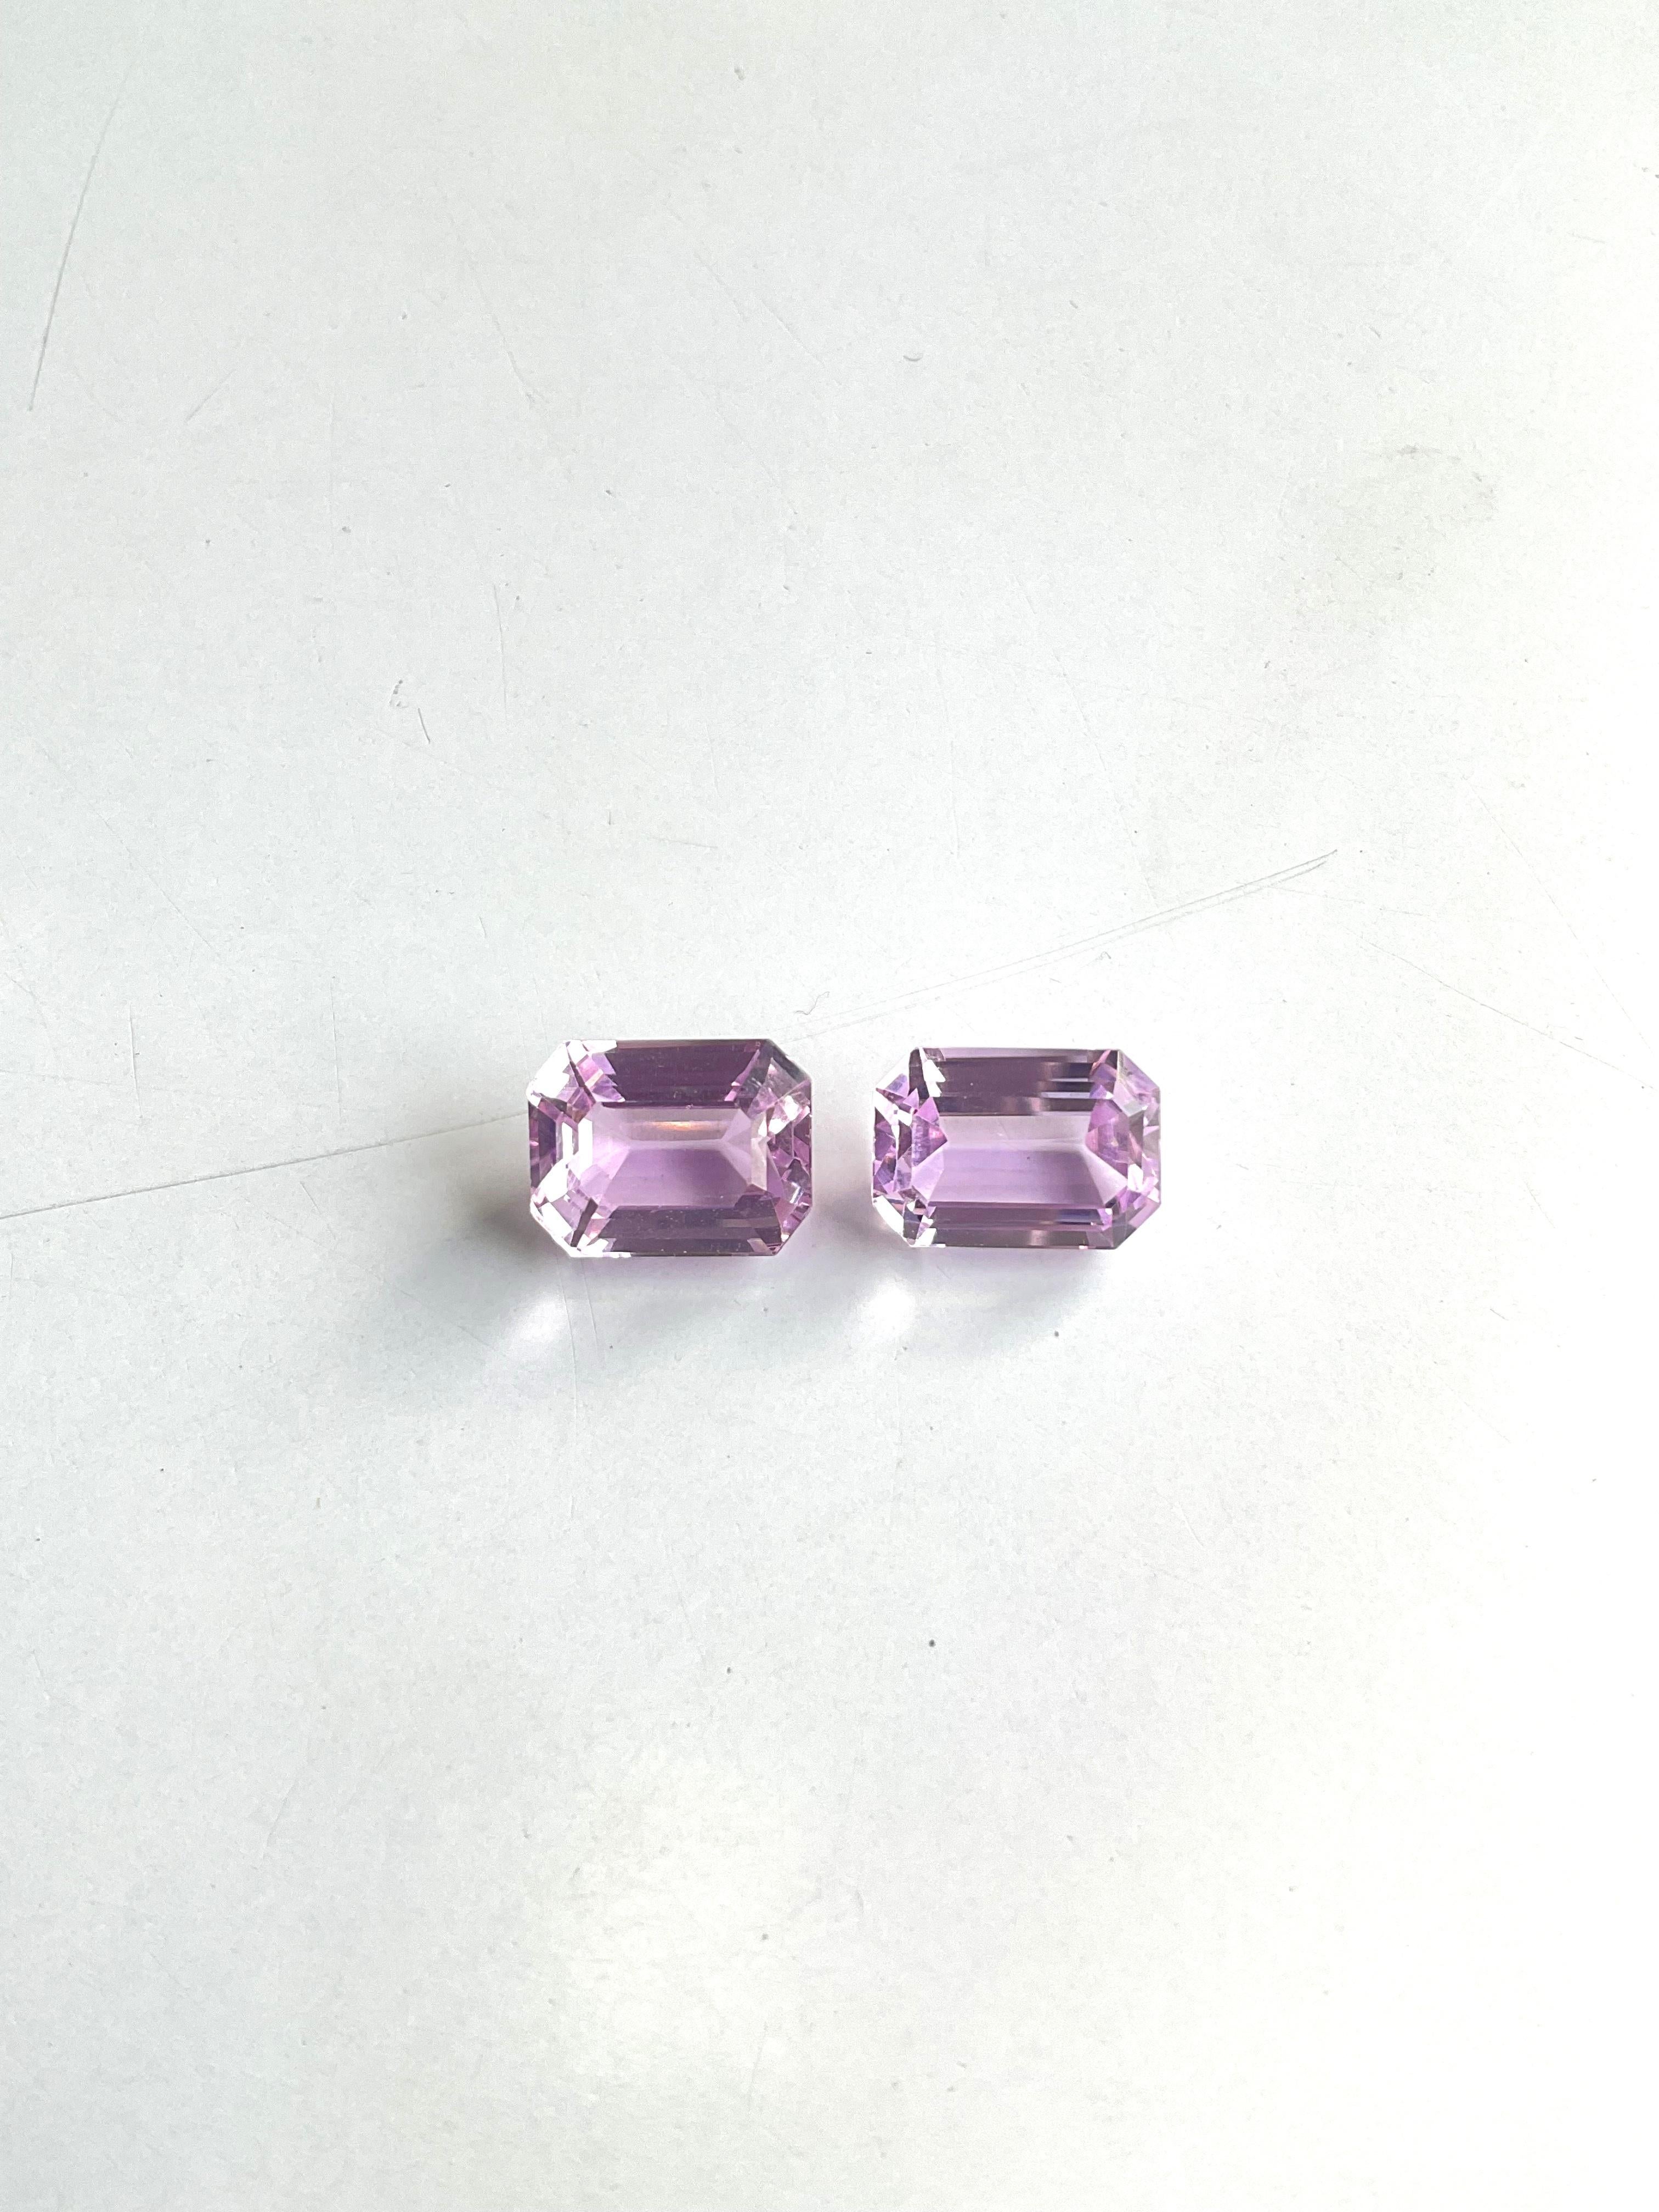 18.64 Carats Pink Kunzite Octagon Natural Cut Stones For Fine Gem Jewellery For Sale 2